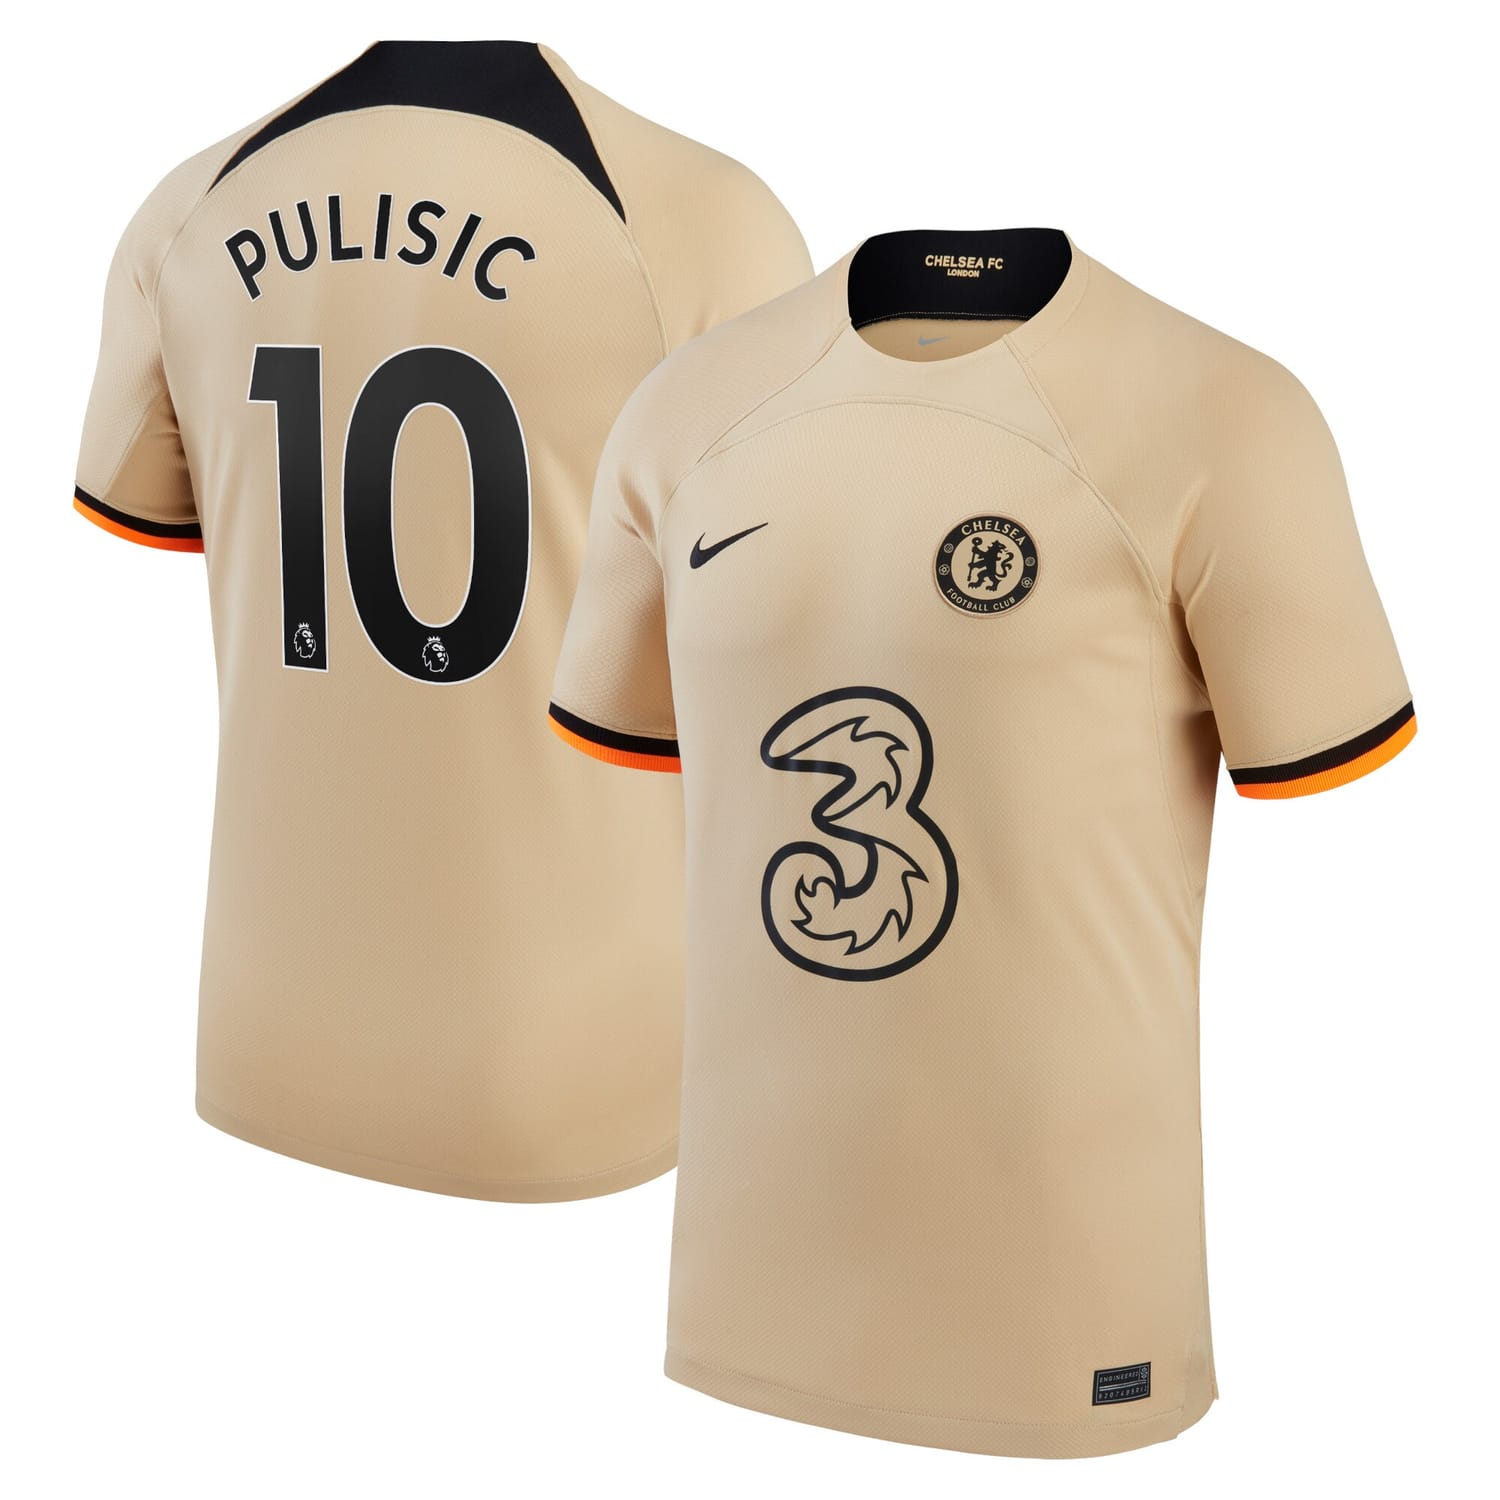 Premier League Chelsea Third Jersey Shirt Gold 2022-23 player Christian Pulisic printing for Men